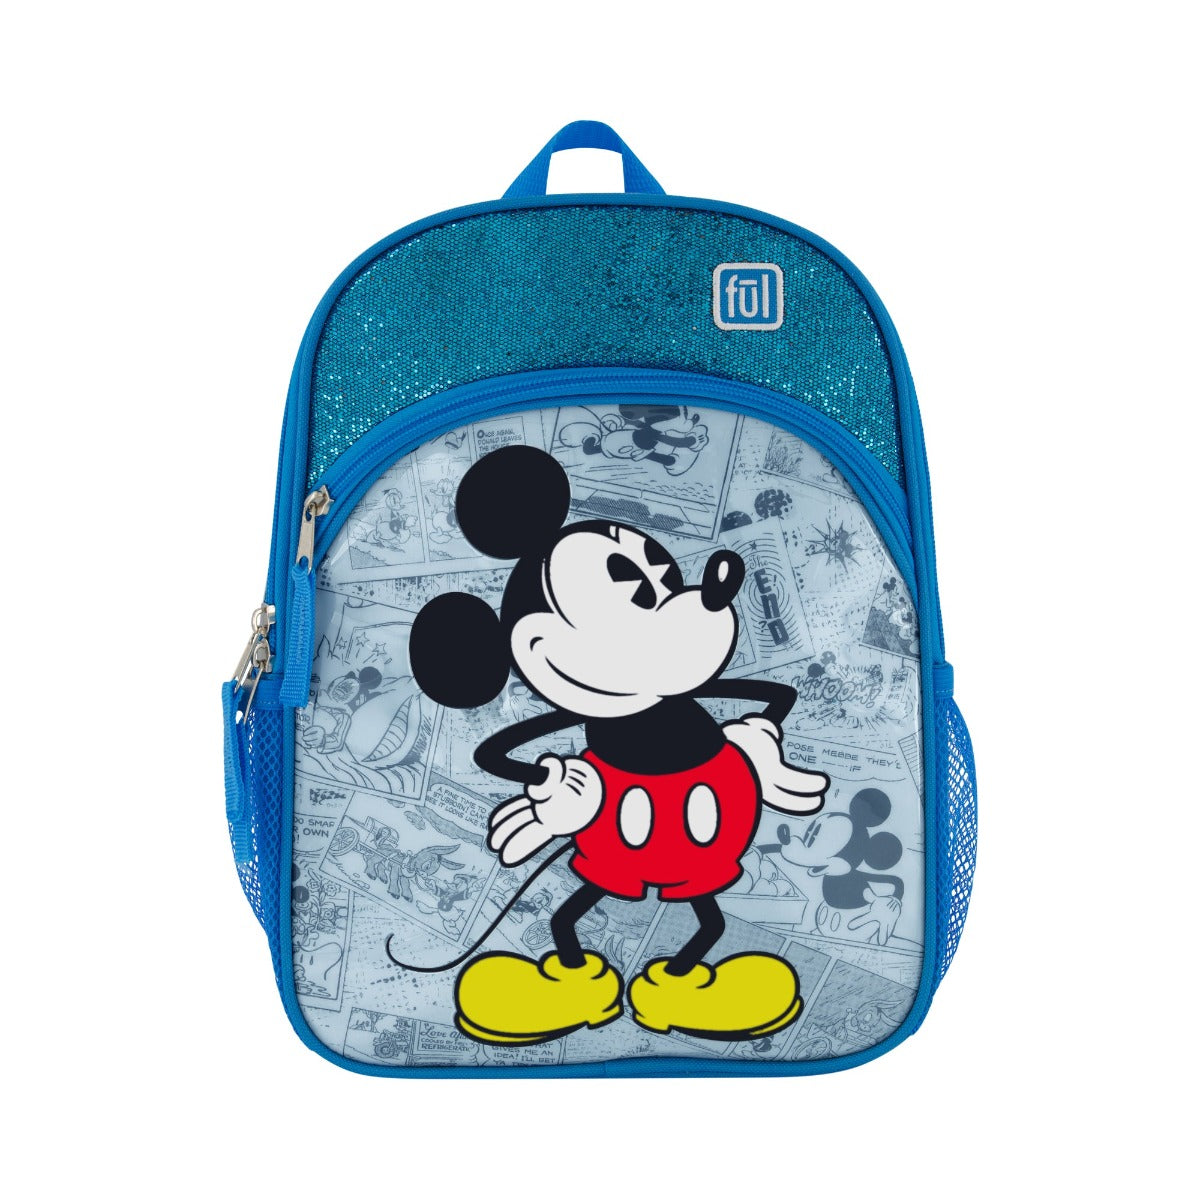 Blue Disney Heritage Mikey Mouse matching 2 piece set - 13" carry-on backpack for kids